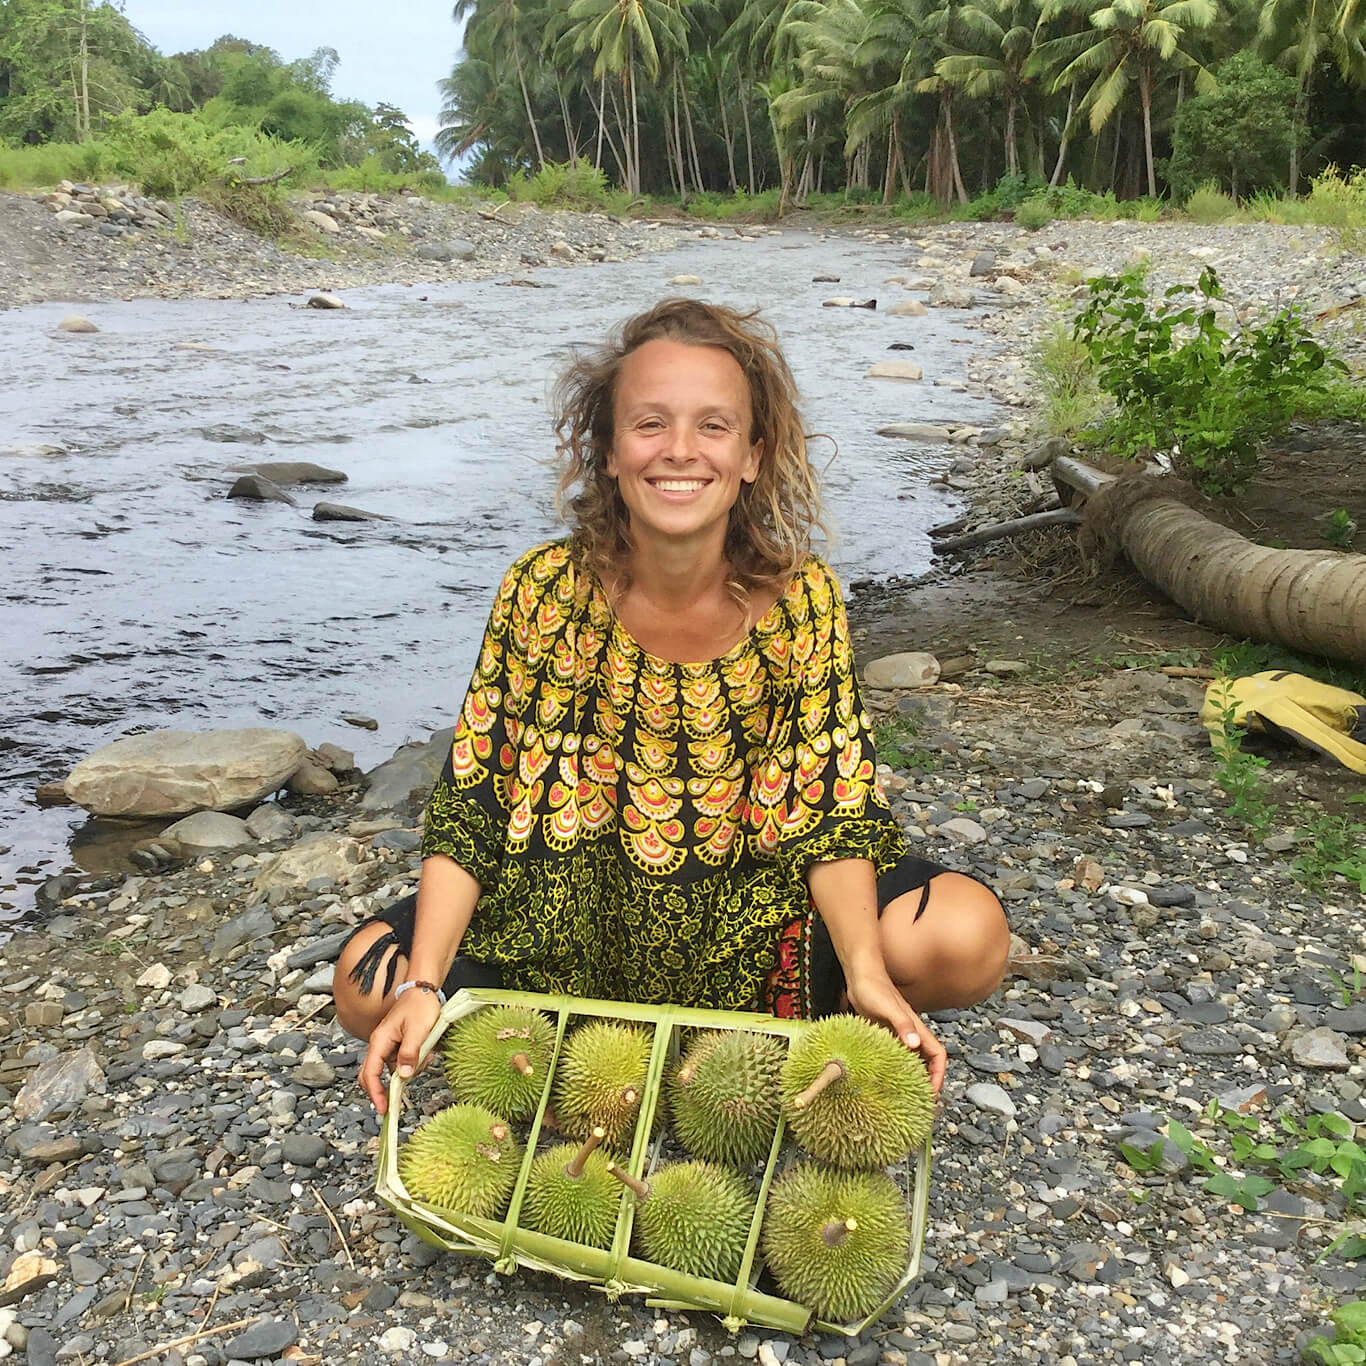 Tina from Fit Shortie posing for a picture with durian at a jungle river in Seram Island